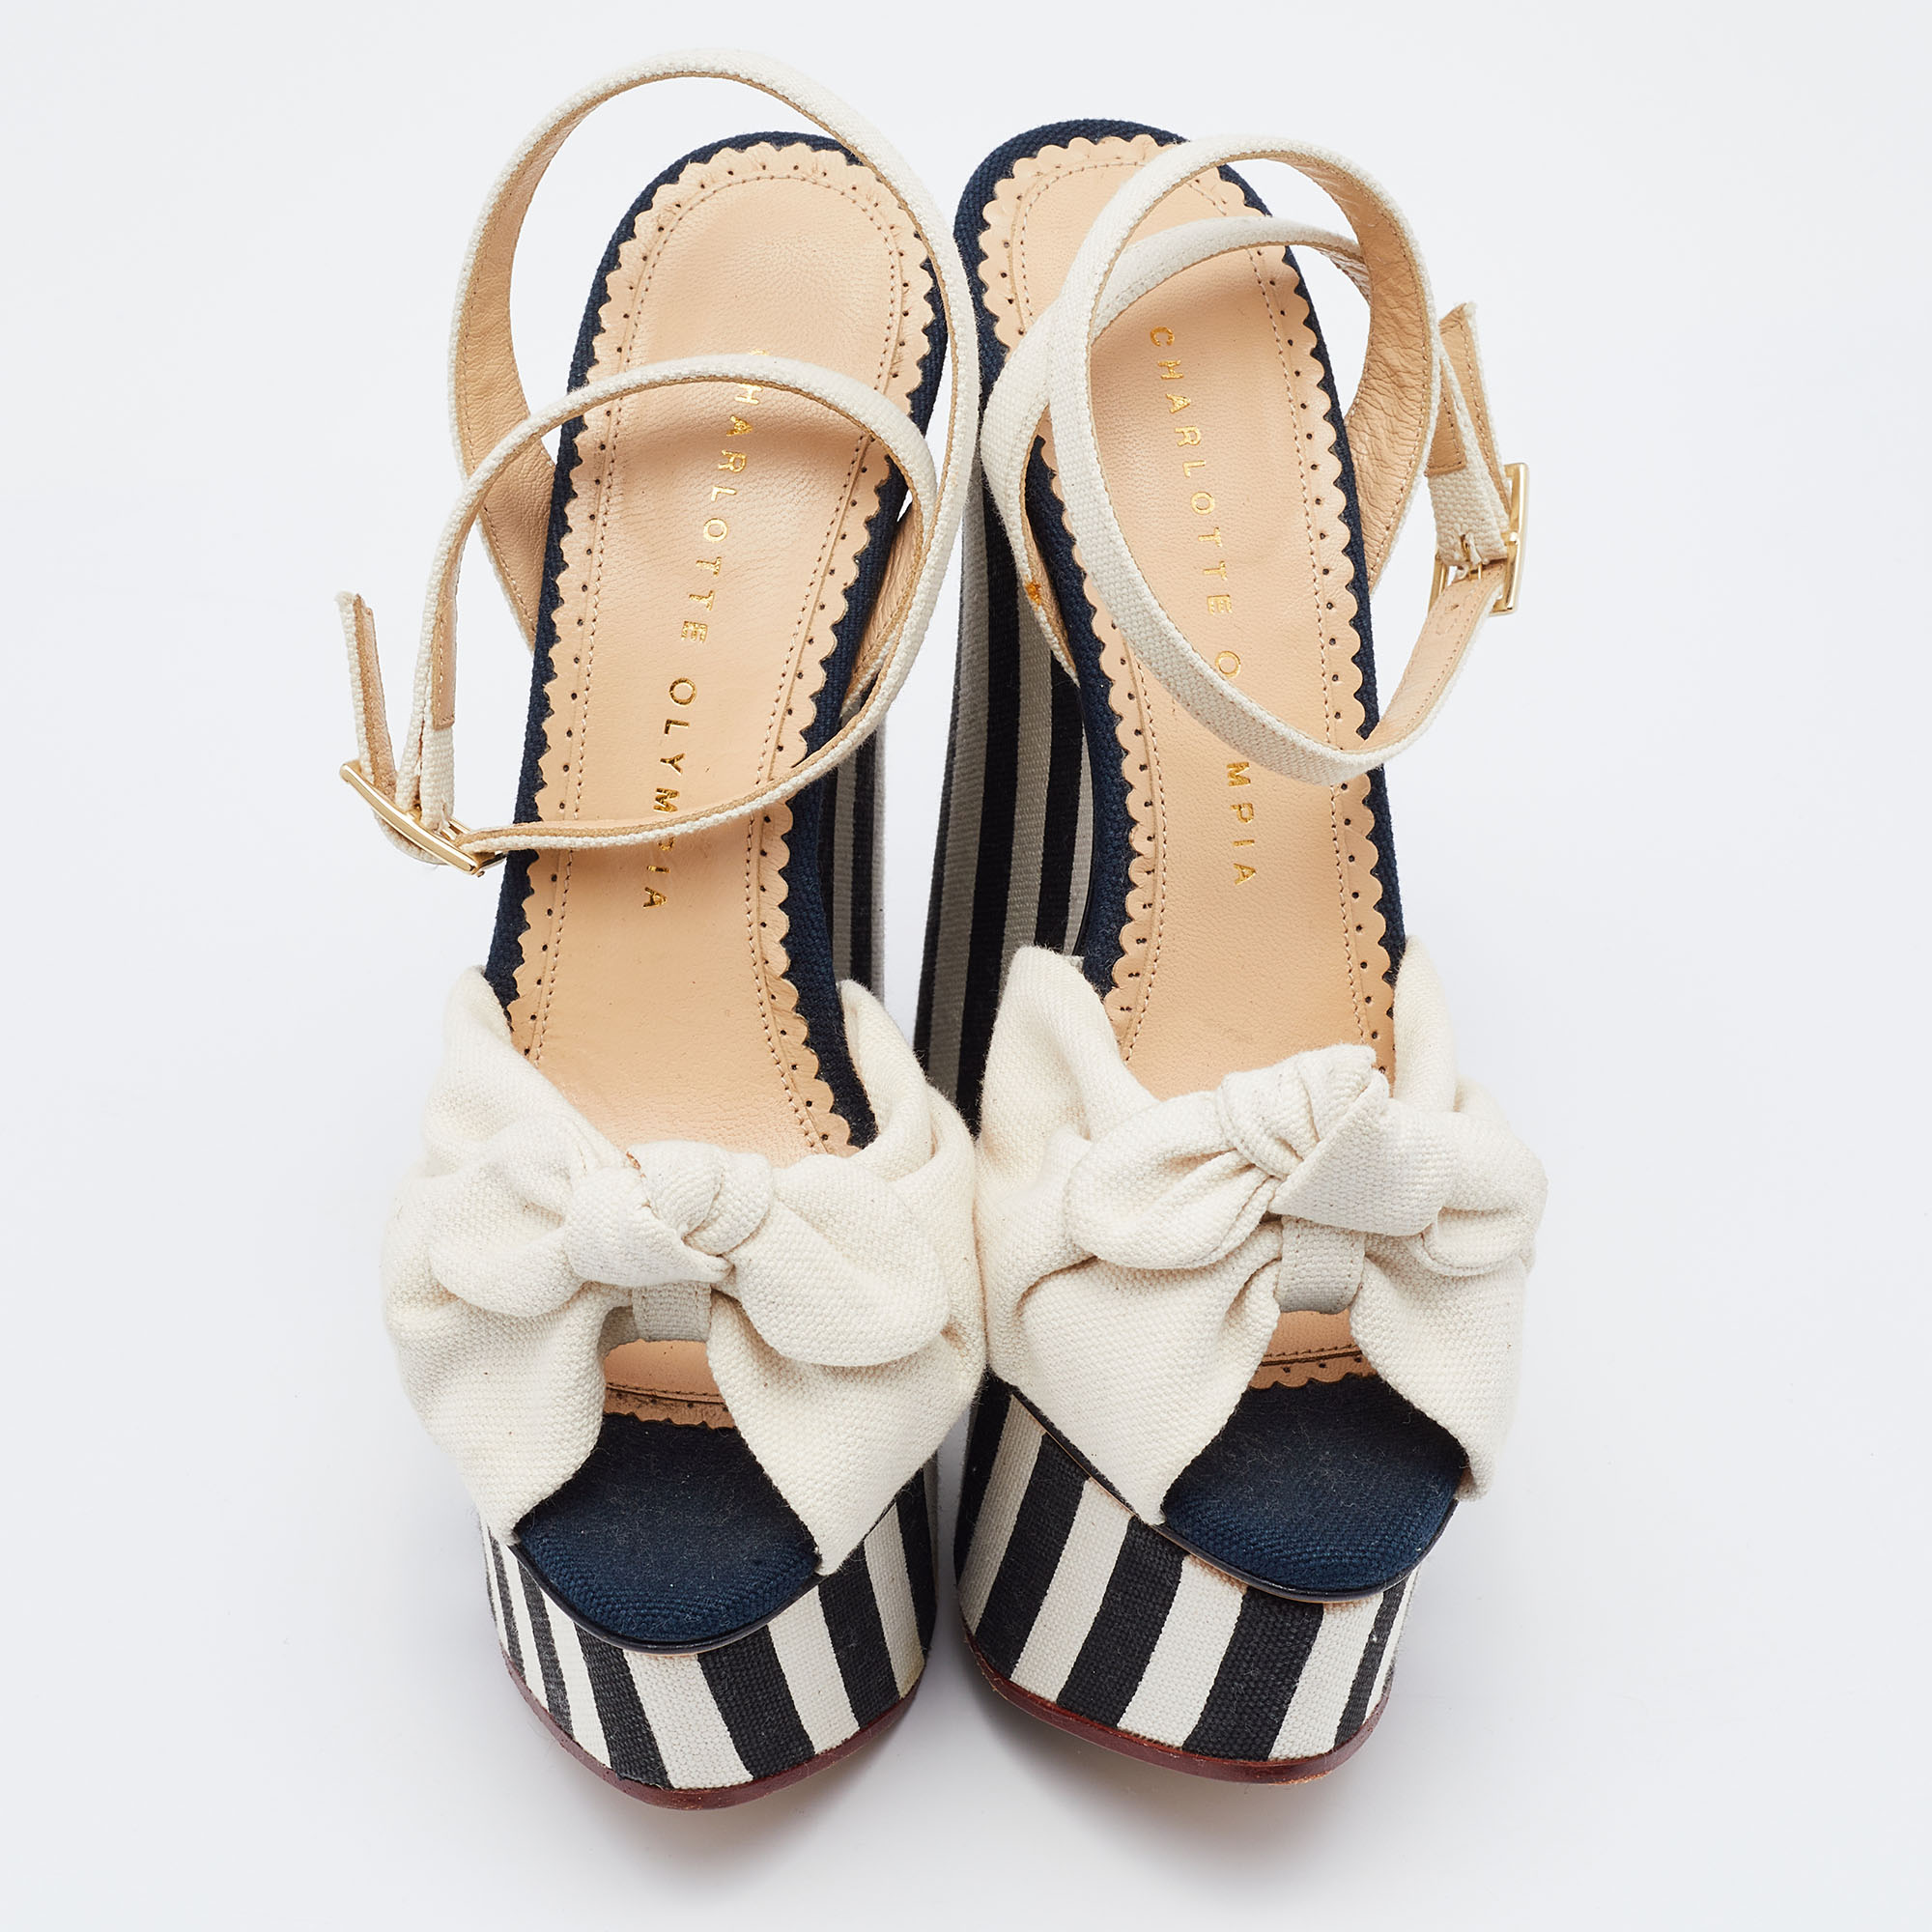 Charlotte Olympia White Canvas Bow Wedge Platform Ankle Strap Sandals Size 36